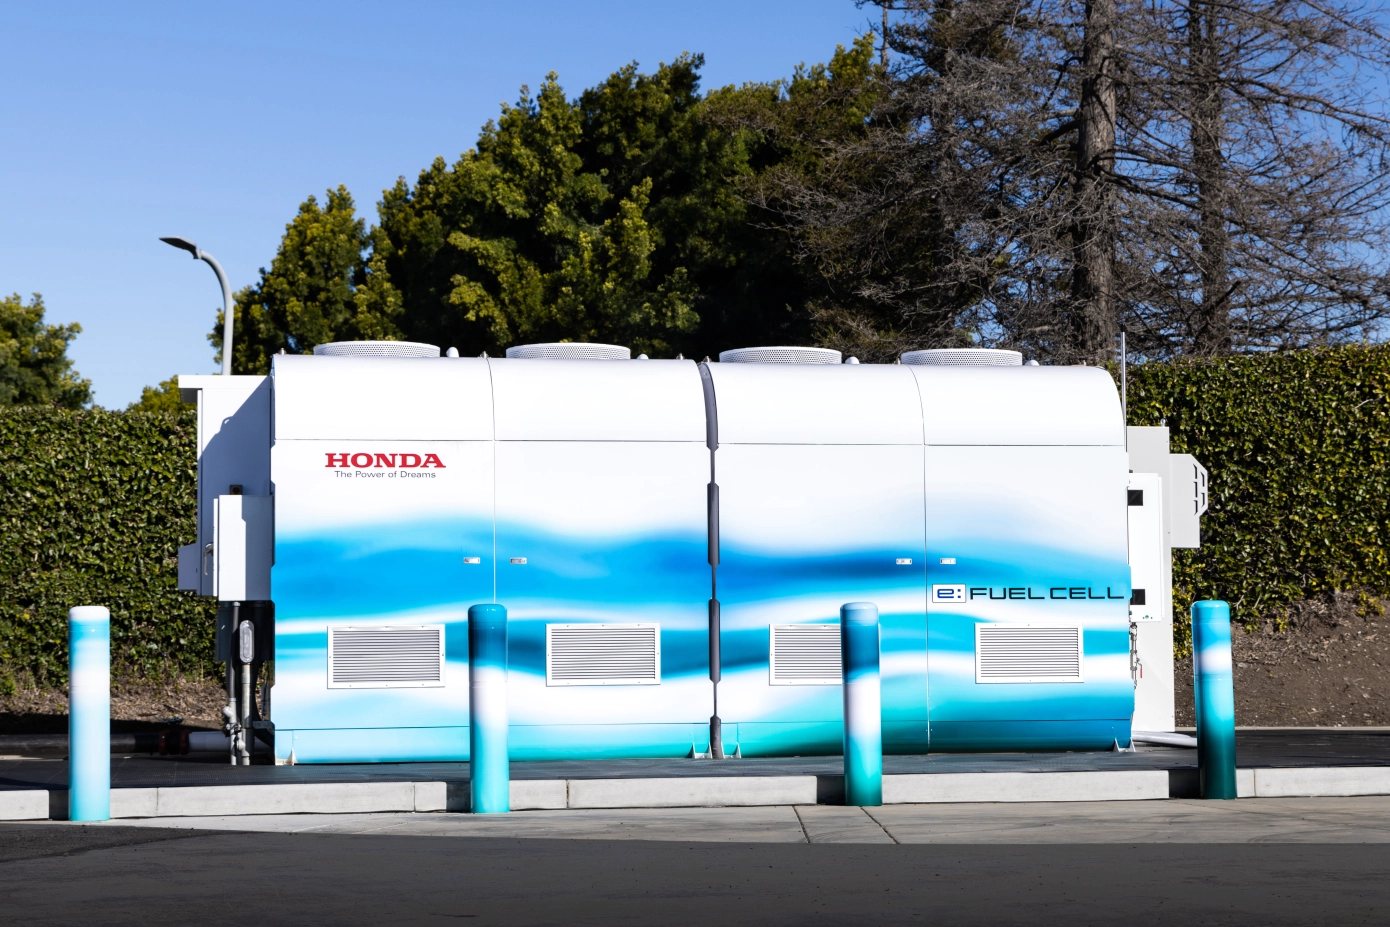 Honda's data center is powered by recycled hydrogen fuel cells, providing reliable and sustainable backup power for the facility in case of a power outage. Image used courtesy of Honda